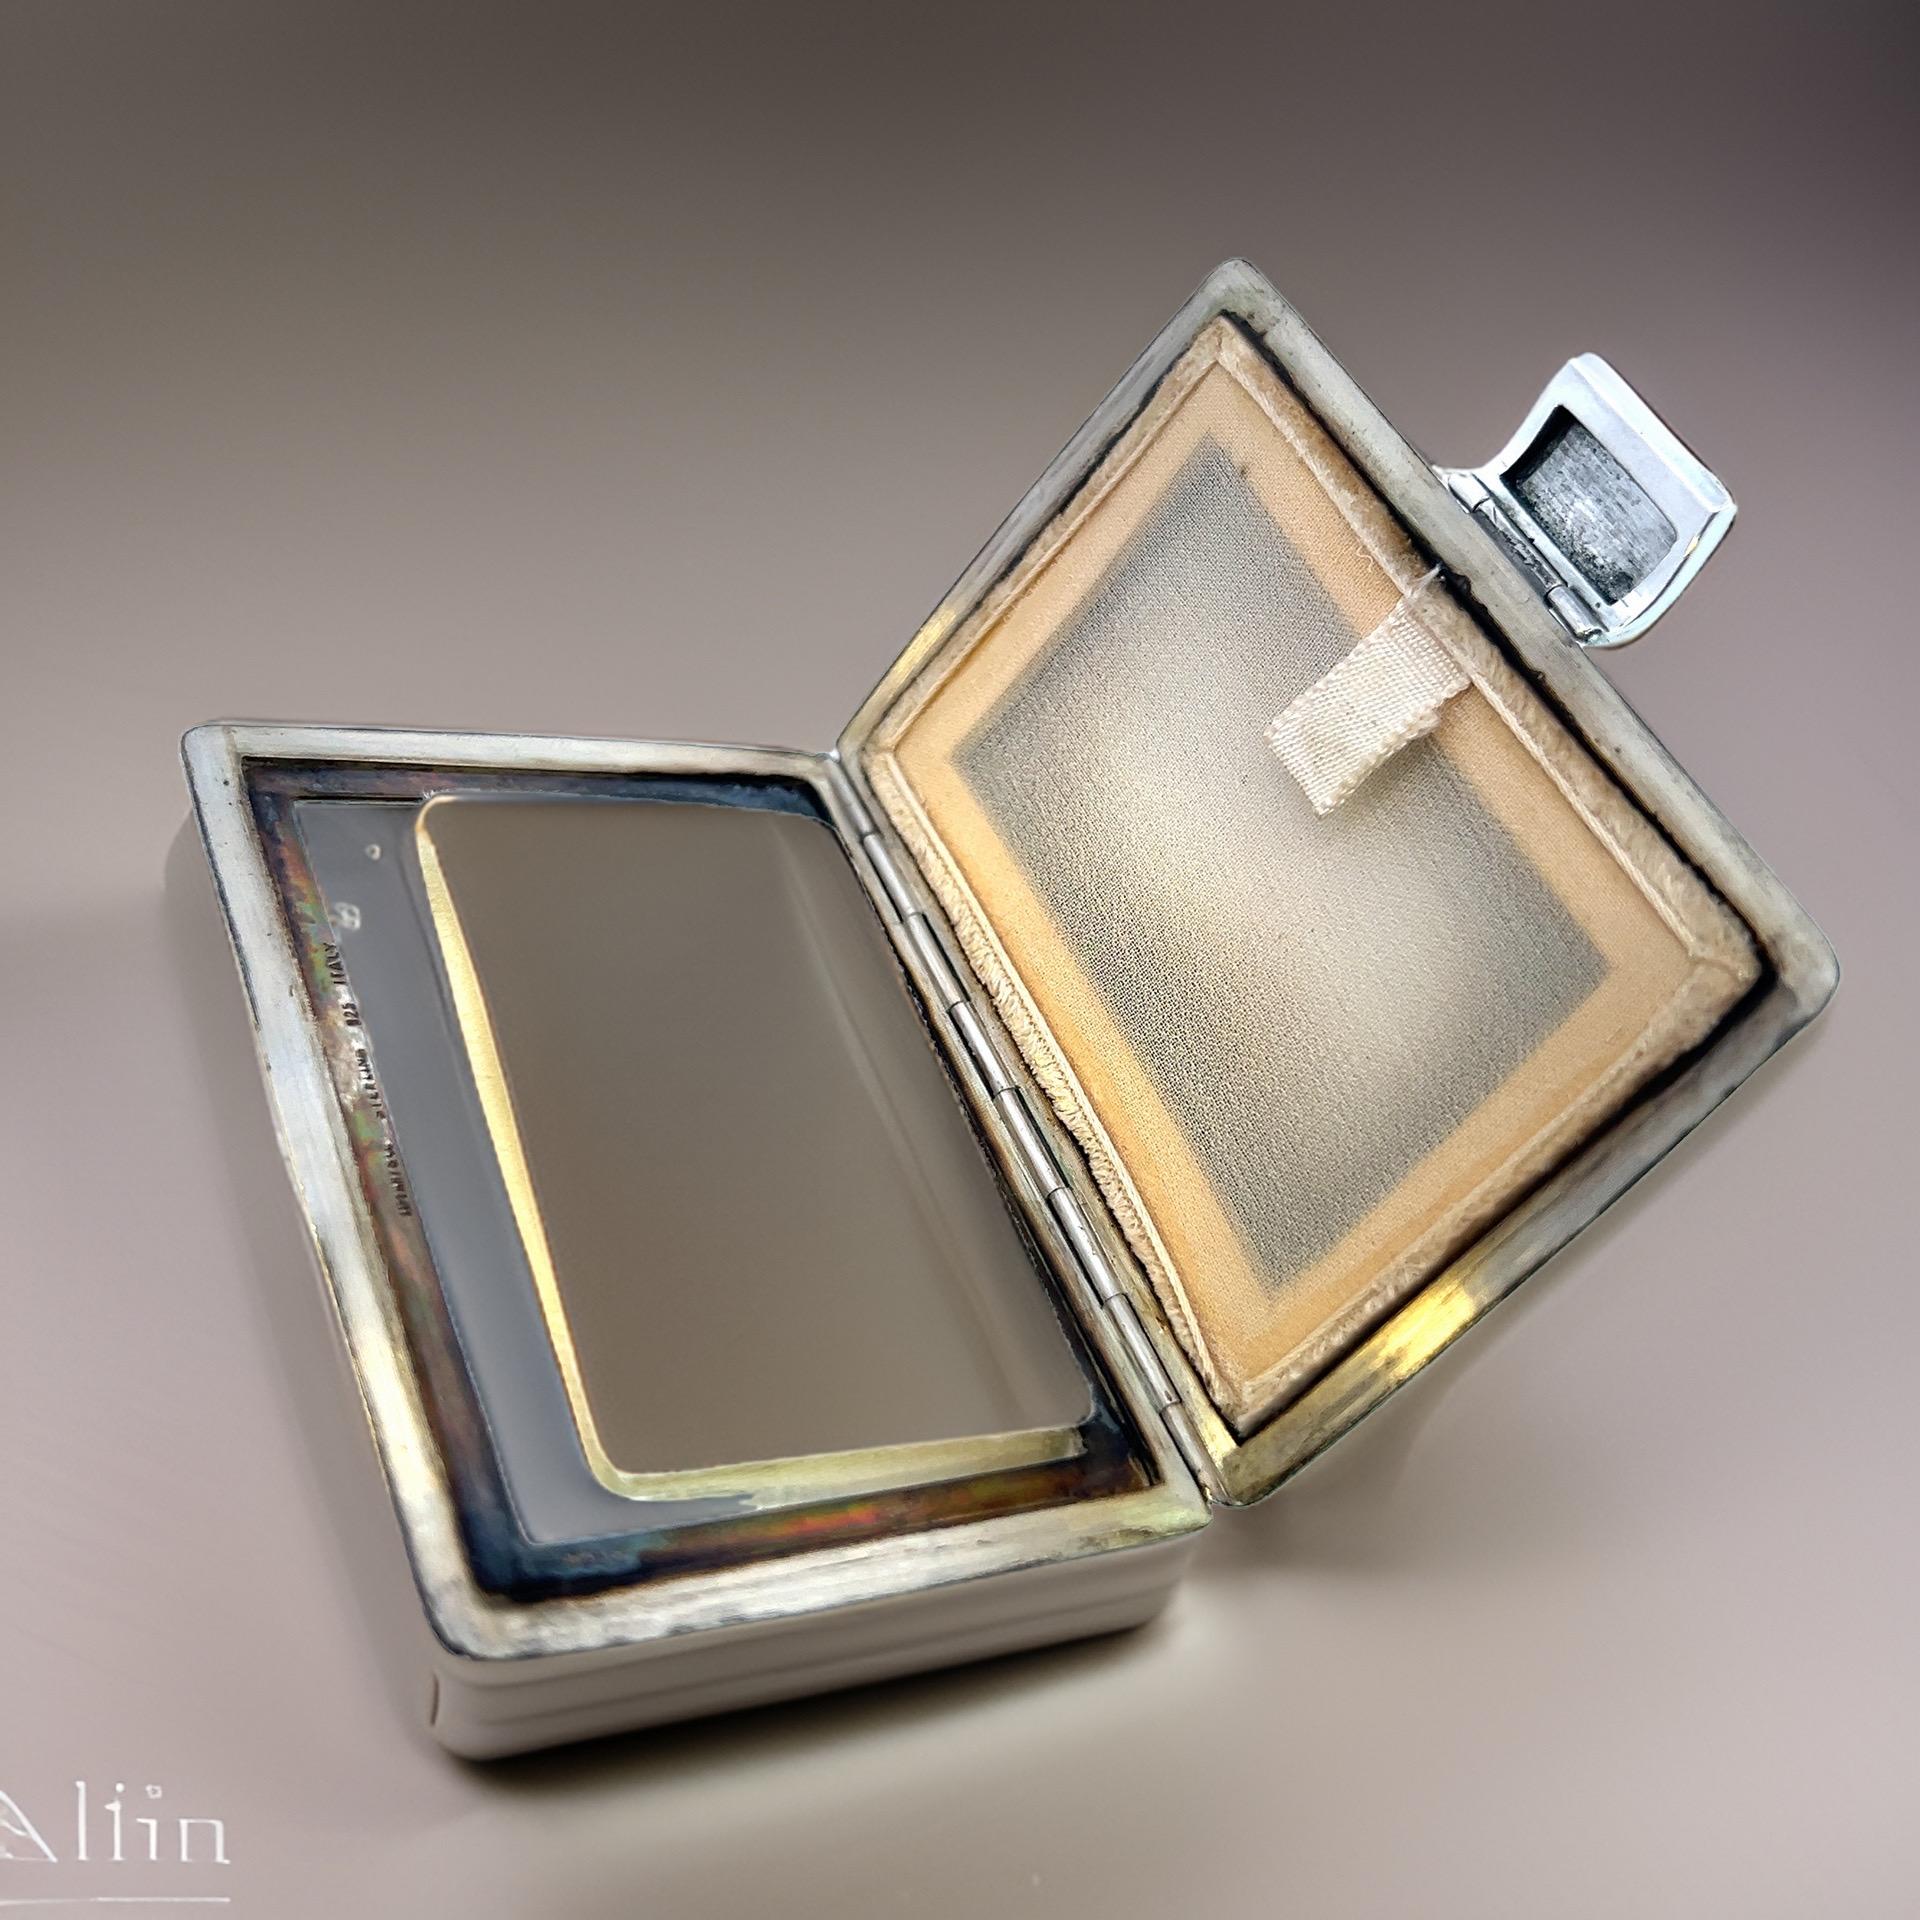 Tiffany & Co Estate Compact Powder With Mirror Sterling Silver TIF593

This elegant Authentic Tiffany Compact Powder is made of sterling silver and has a weight of 98.6 grams.

TRUSTED SELLER SINCE 2002

PLEASE SEE OUR HUNDREDS OF POSITIVE FEEDBACKS